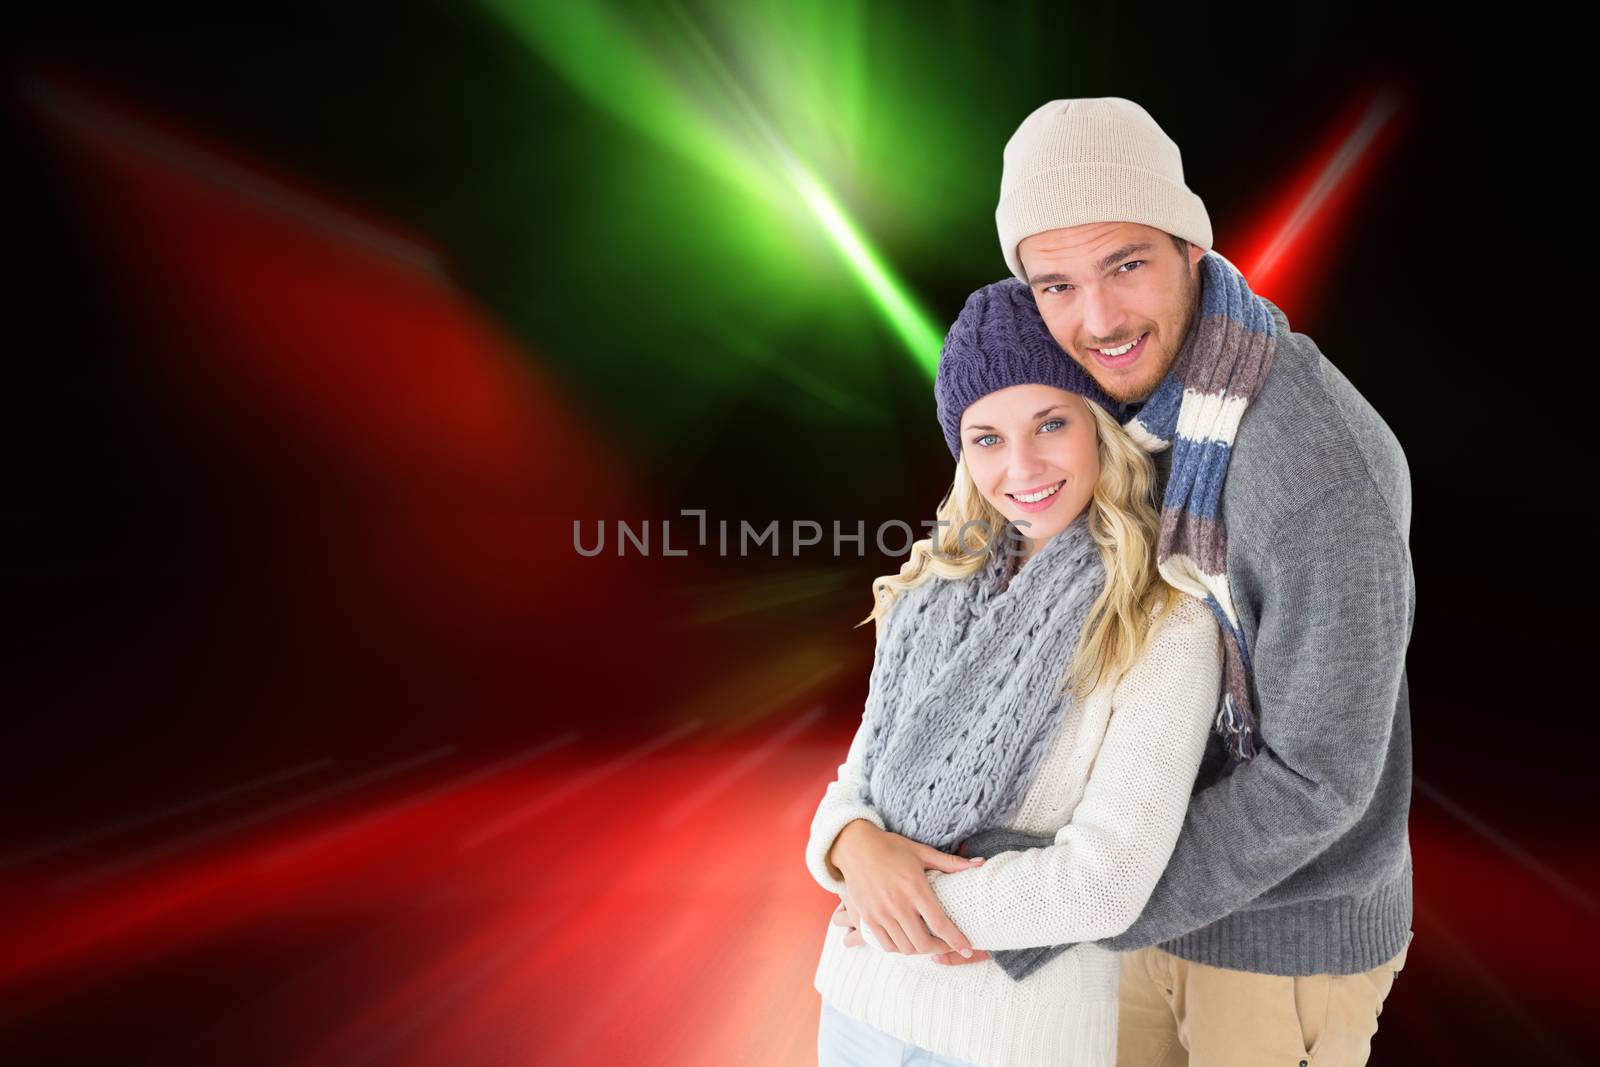 Attractive couple in winter fashion hugging against cool nightlife lights